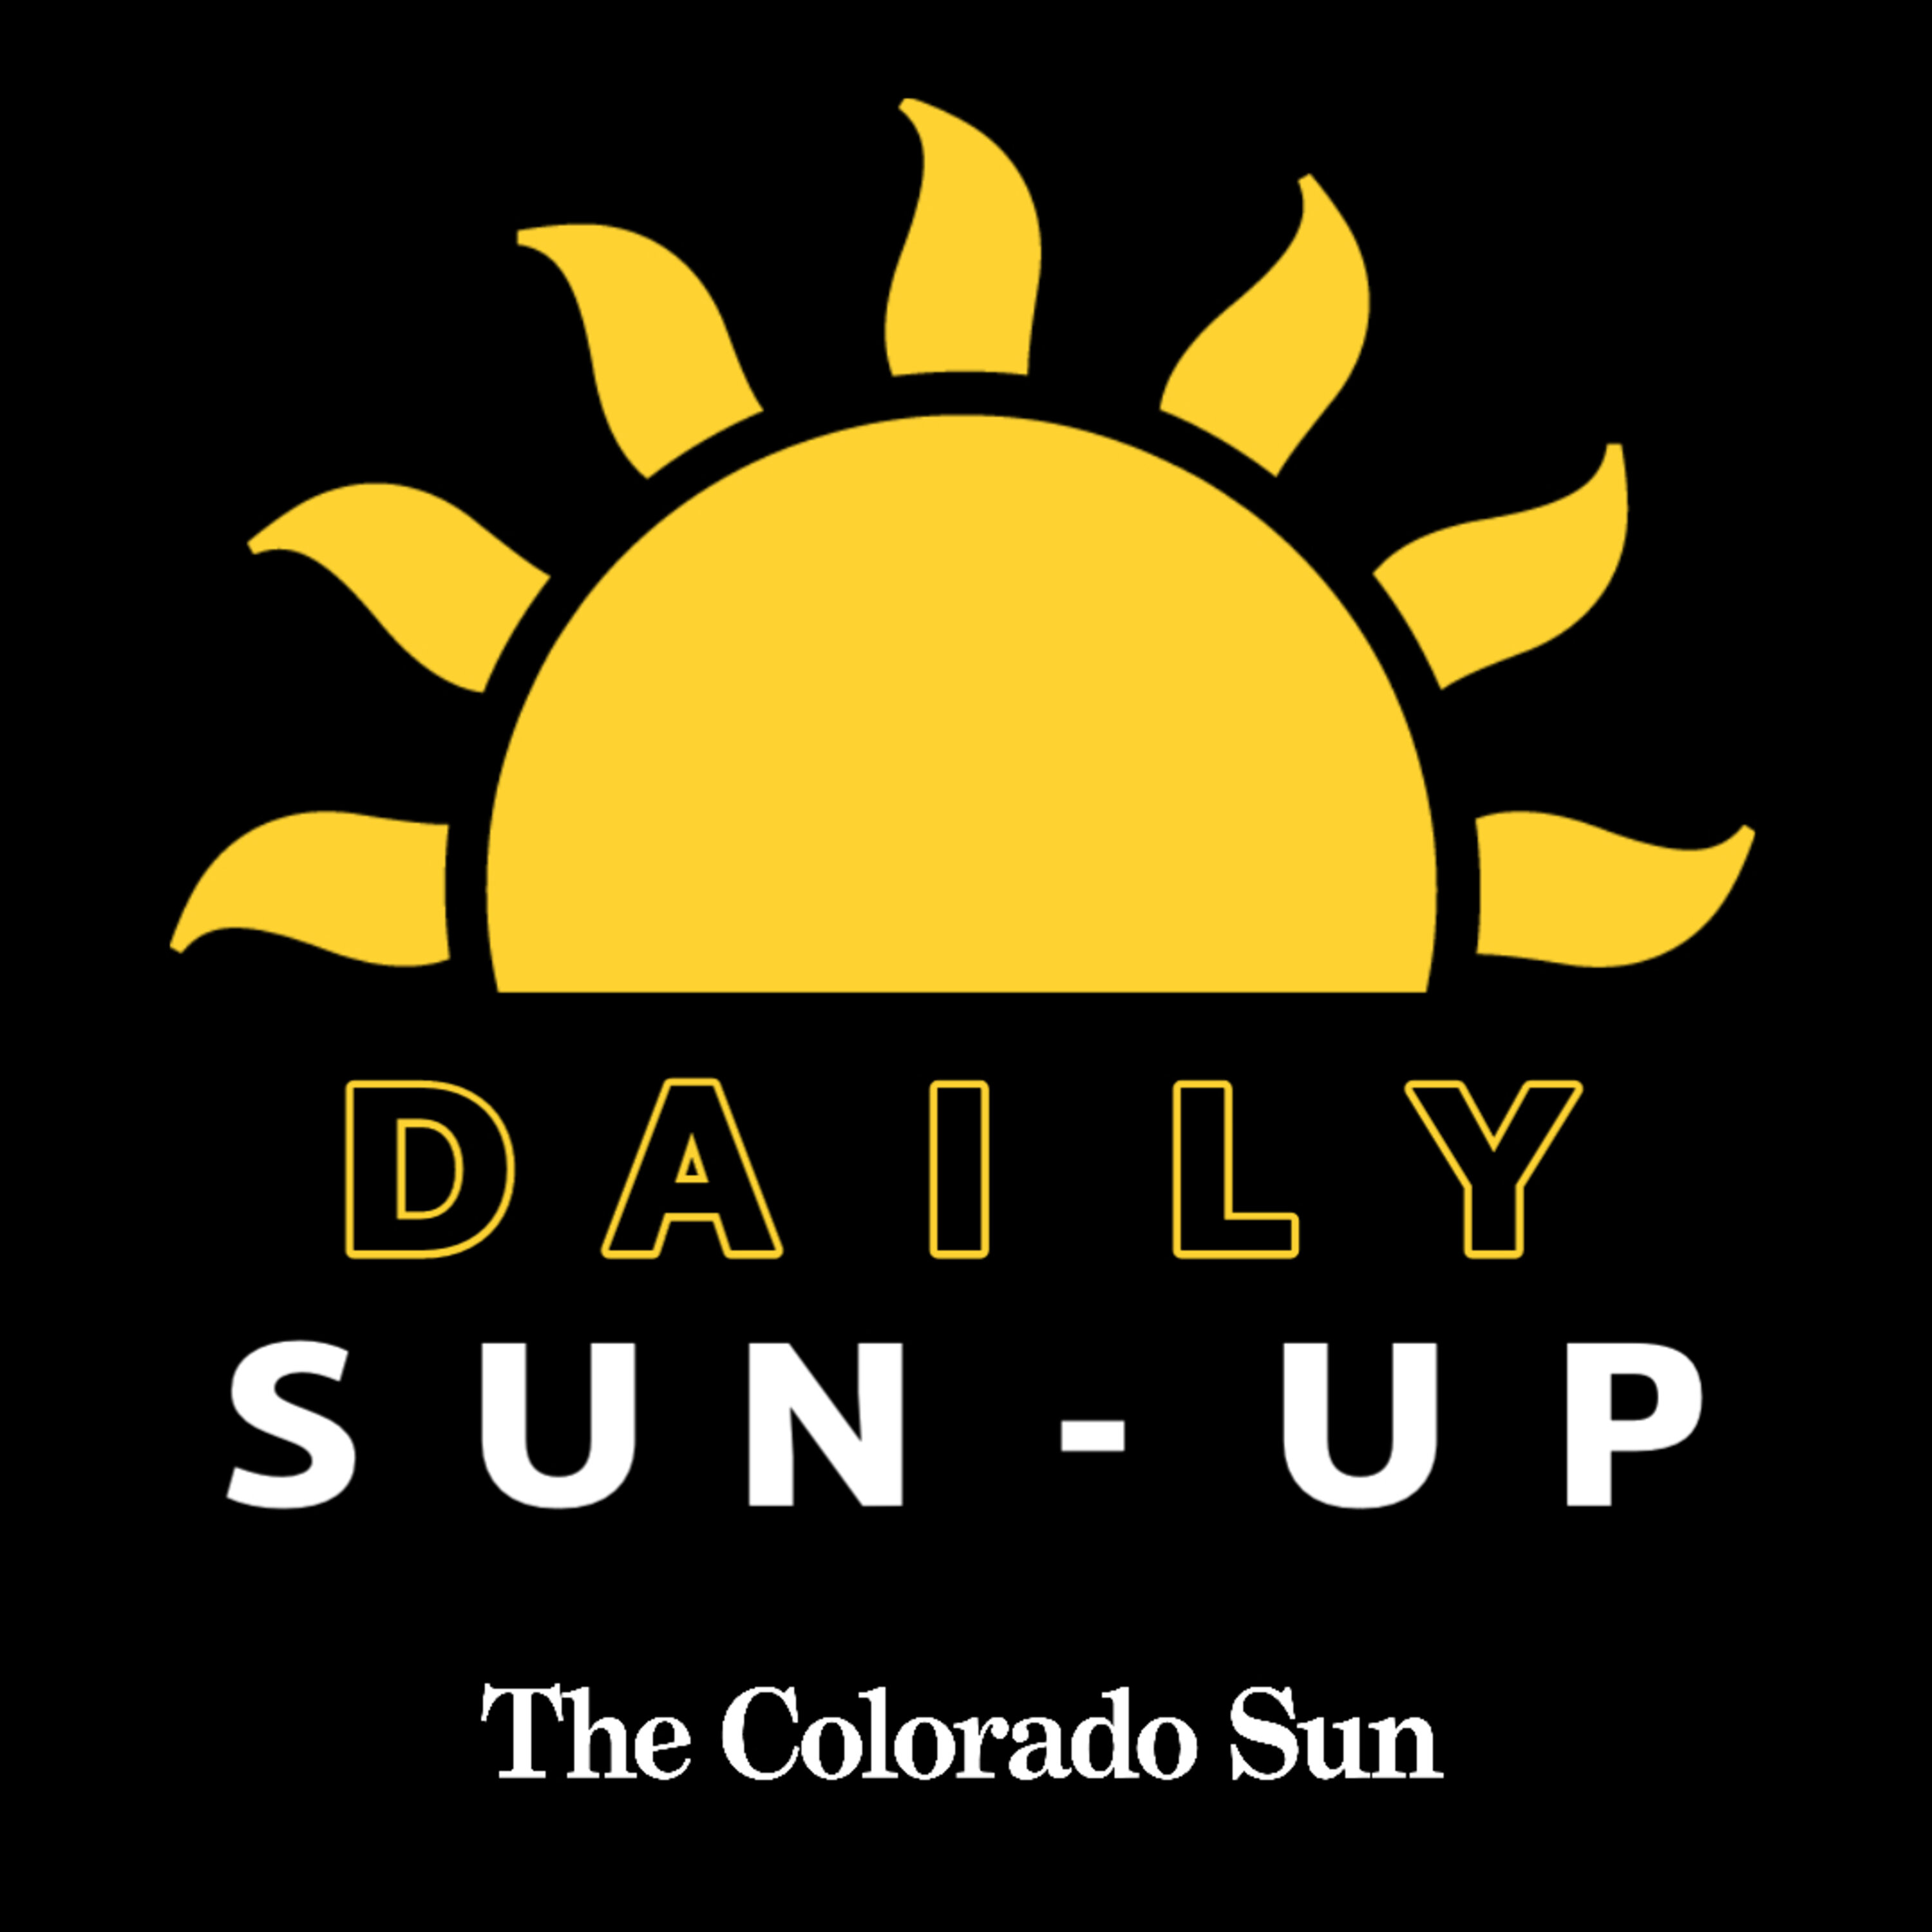 Colorado Sun Daily Sun-Up: Students launch platform to discuss mental health and racial justice, Tivoli Union Brewery